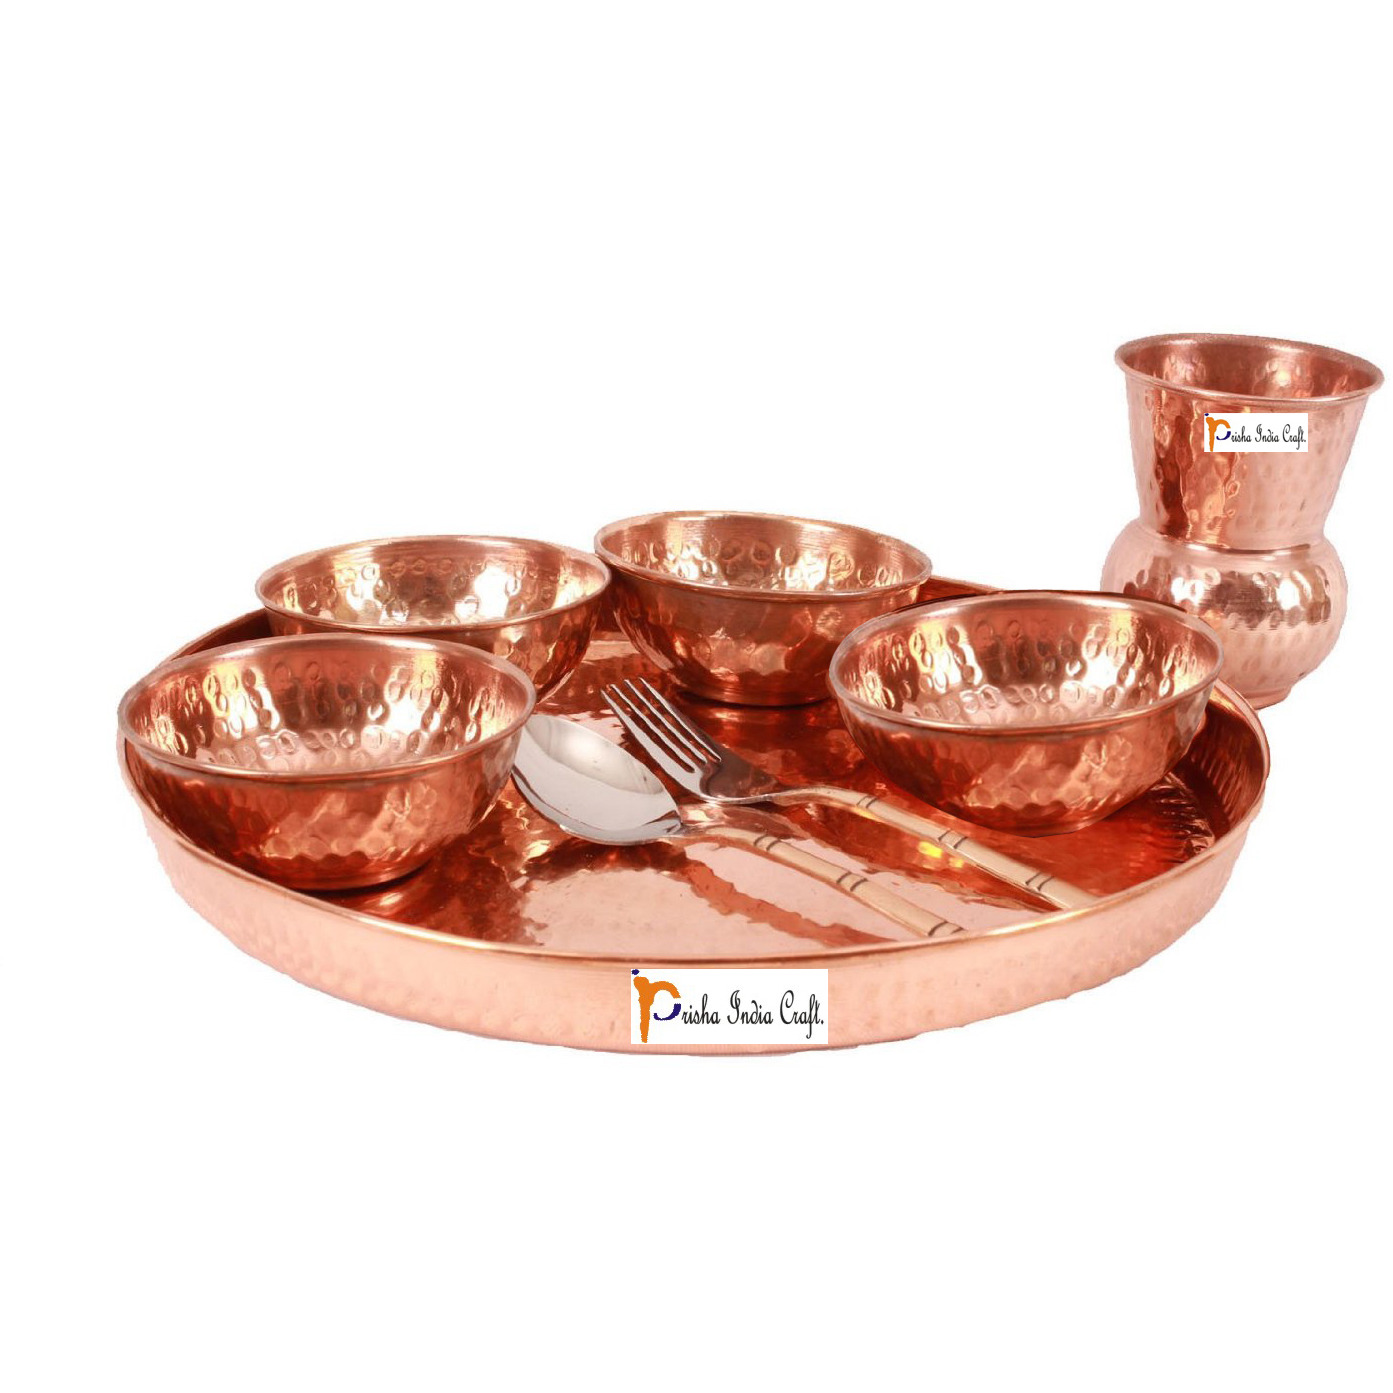 Prisha India Craft B. Set of 6 Dinnerware Traditional 100% Pure Copper Dinner Set of Thali Plate, Bowls, Glass and Spoon, Dia 12  With 1 Pure Copper Pitcher Jug - Christmas Gift